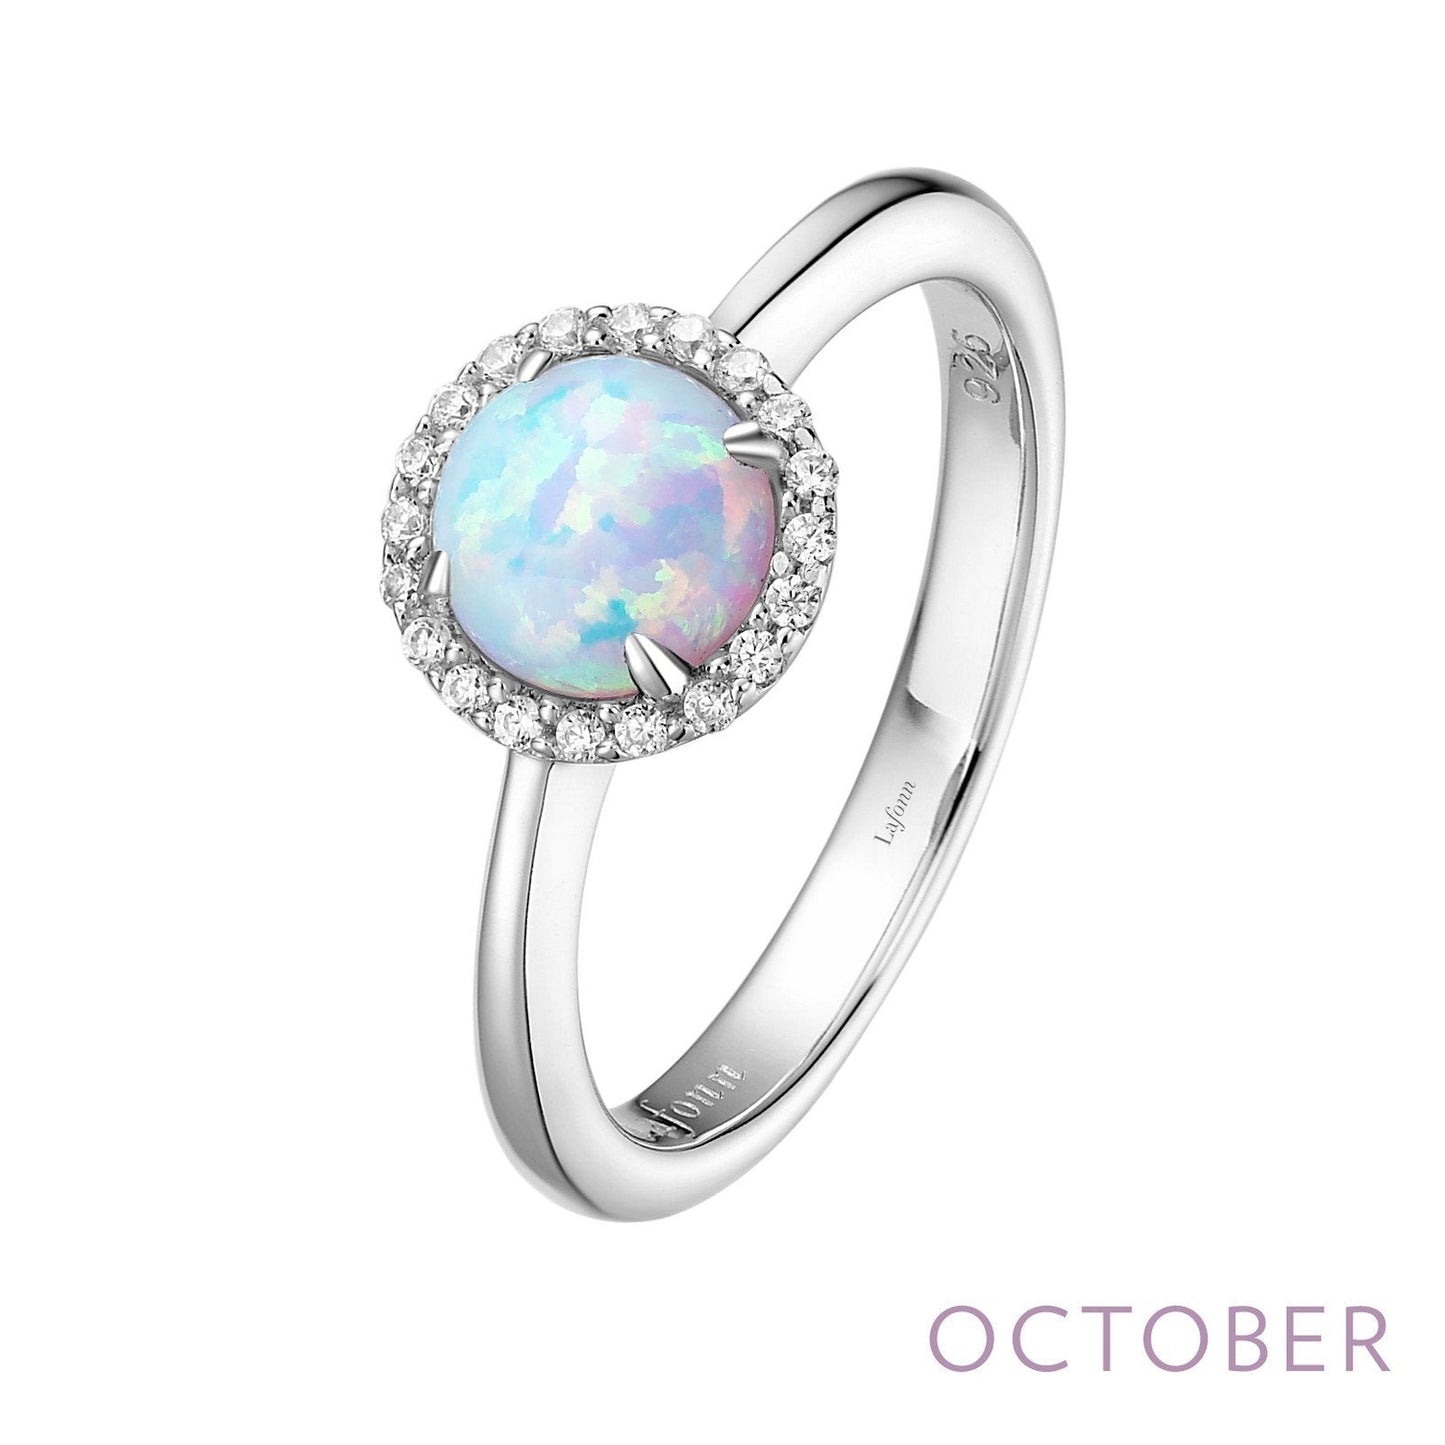 Load image into Gallery viewer, LaFonn Platinum OCTOBER  6.00mm Round, Opal, Approx. N/A CTW RINGS October Birthstone Ring
